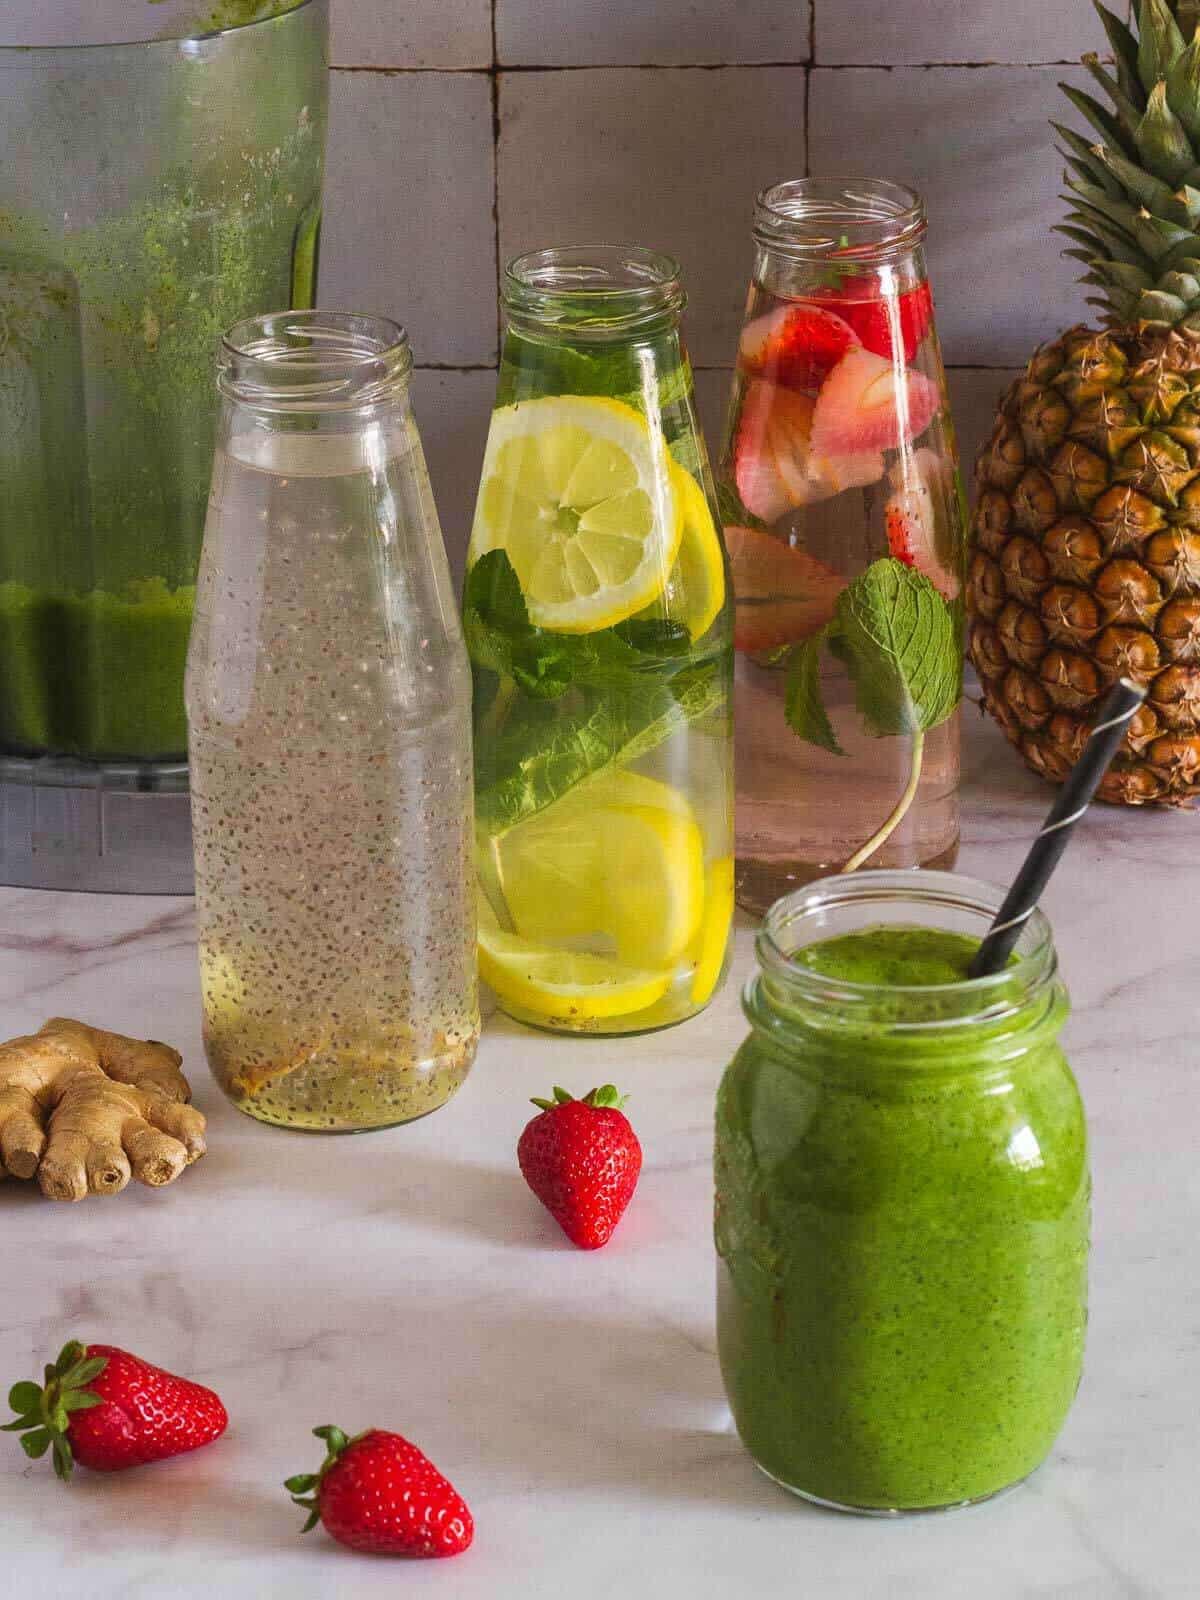 most hydrating drinks and juicing recipes for detox hero 2